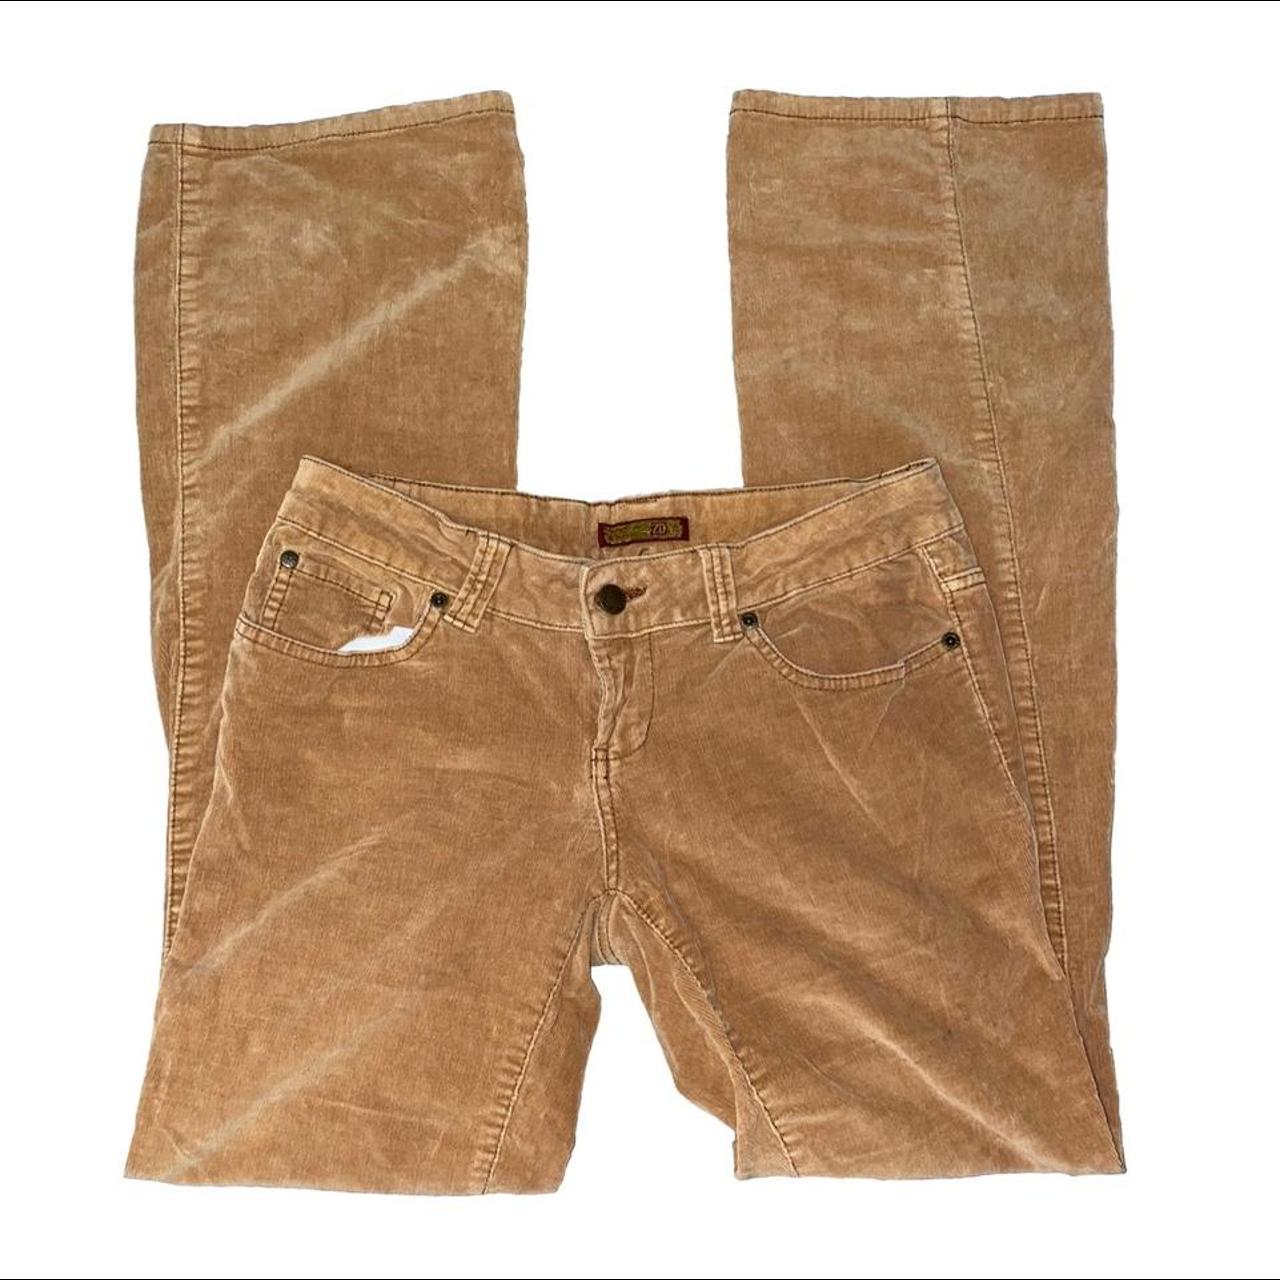 Product Image 2 - 2000s tan corduroy pants. they’re